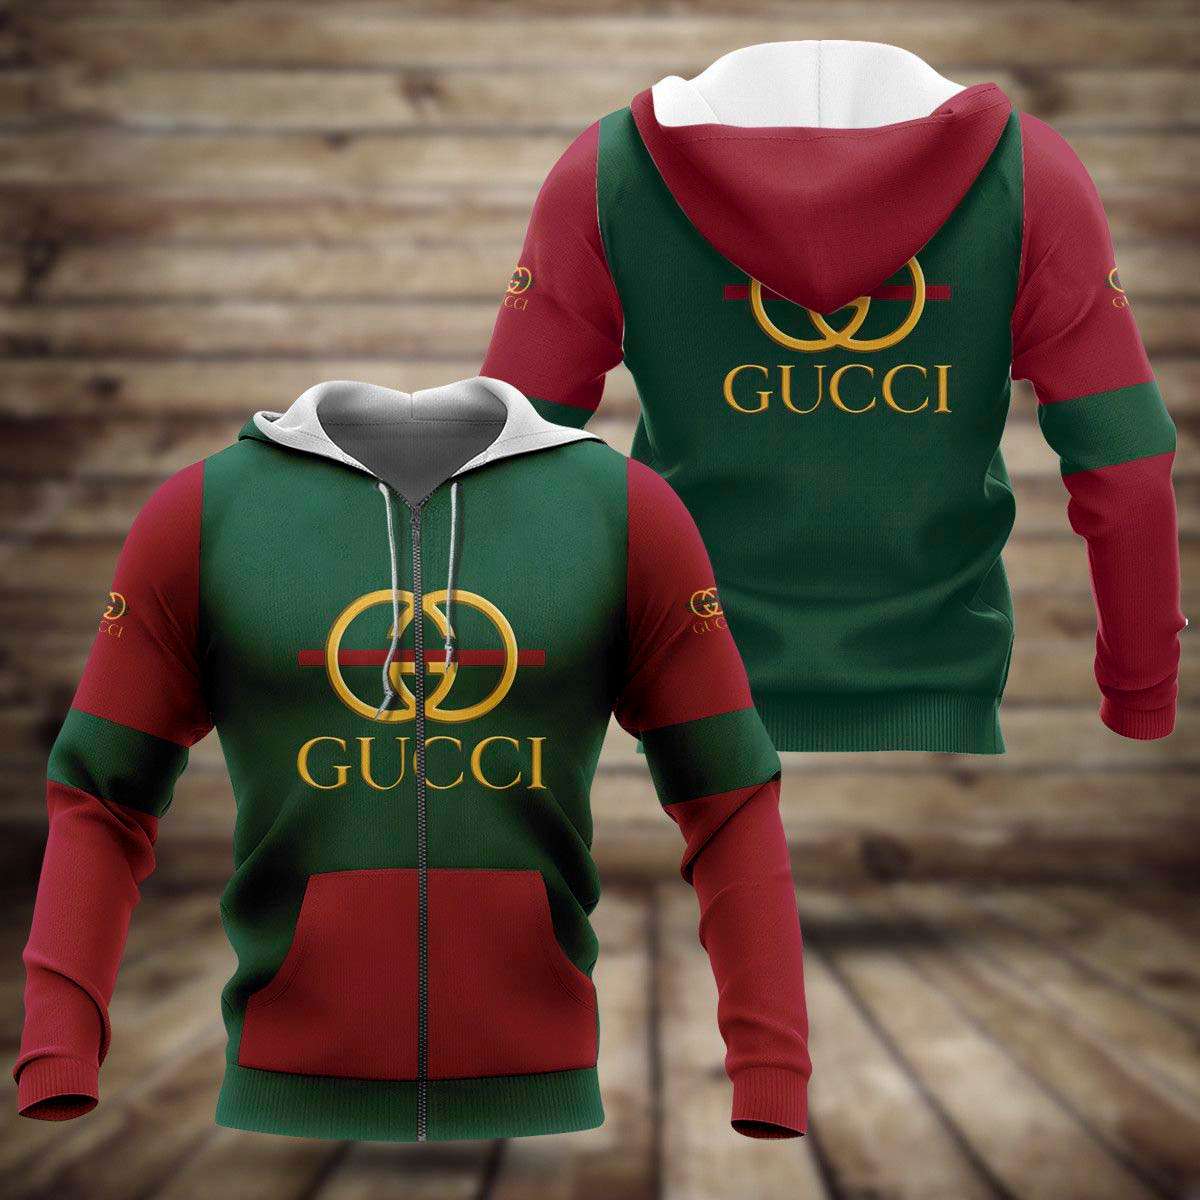 Gucci 3D Hoodie - Find things you'll love with lowest prices.